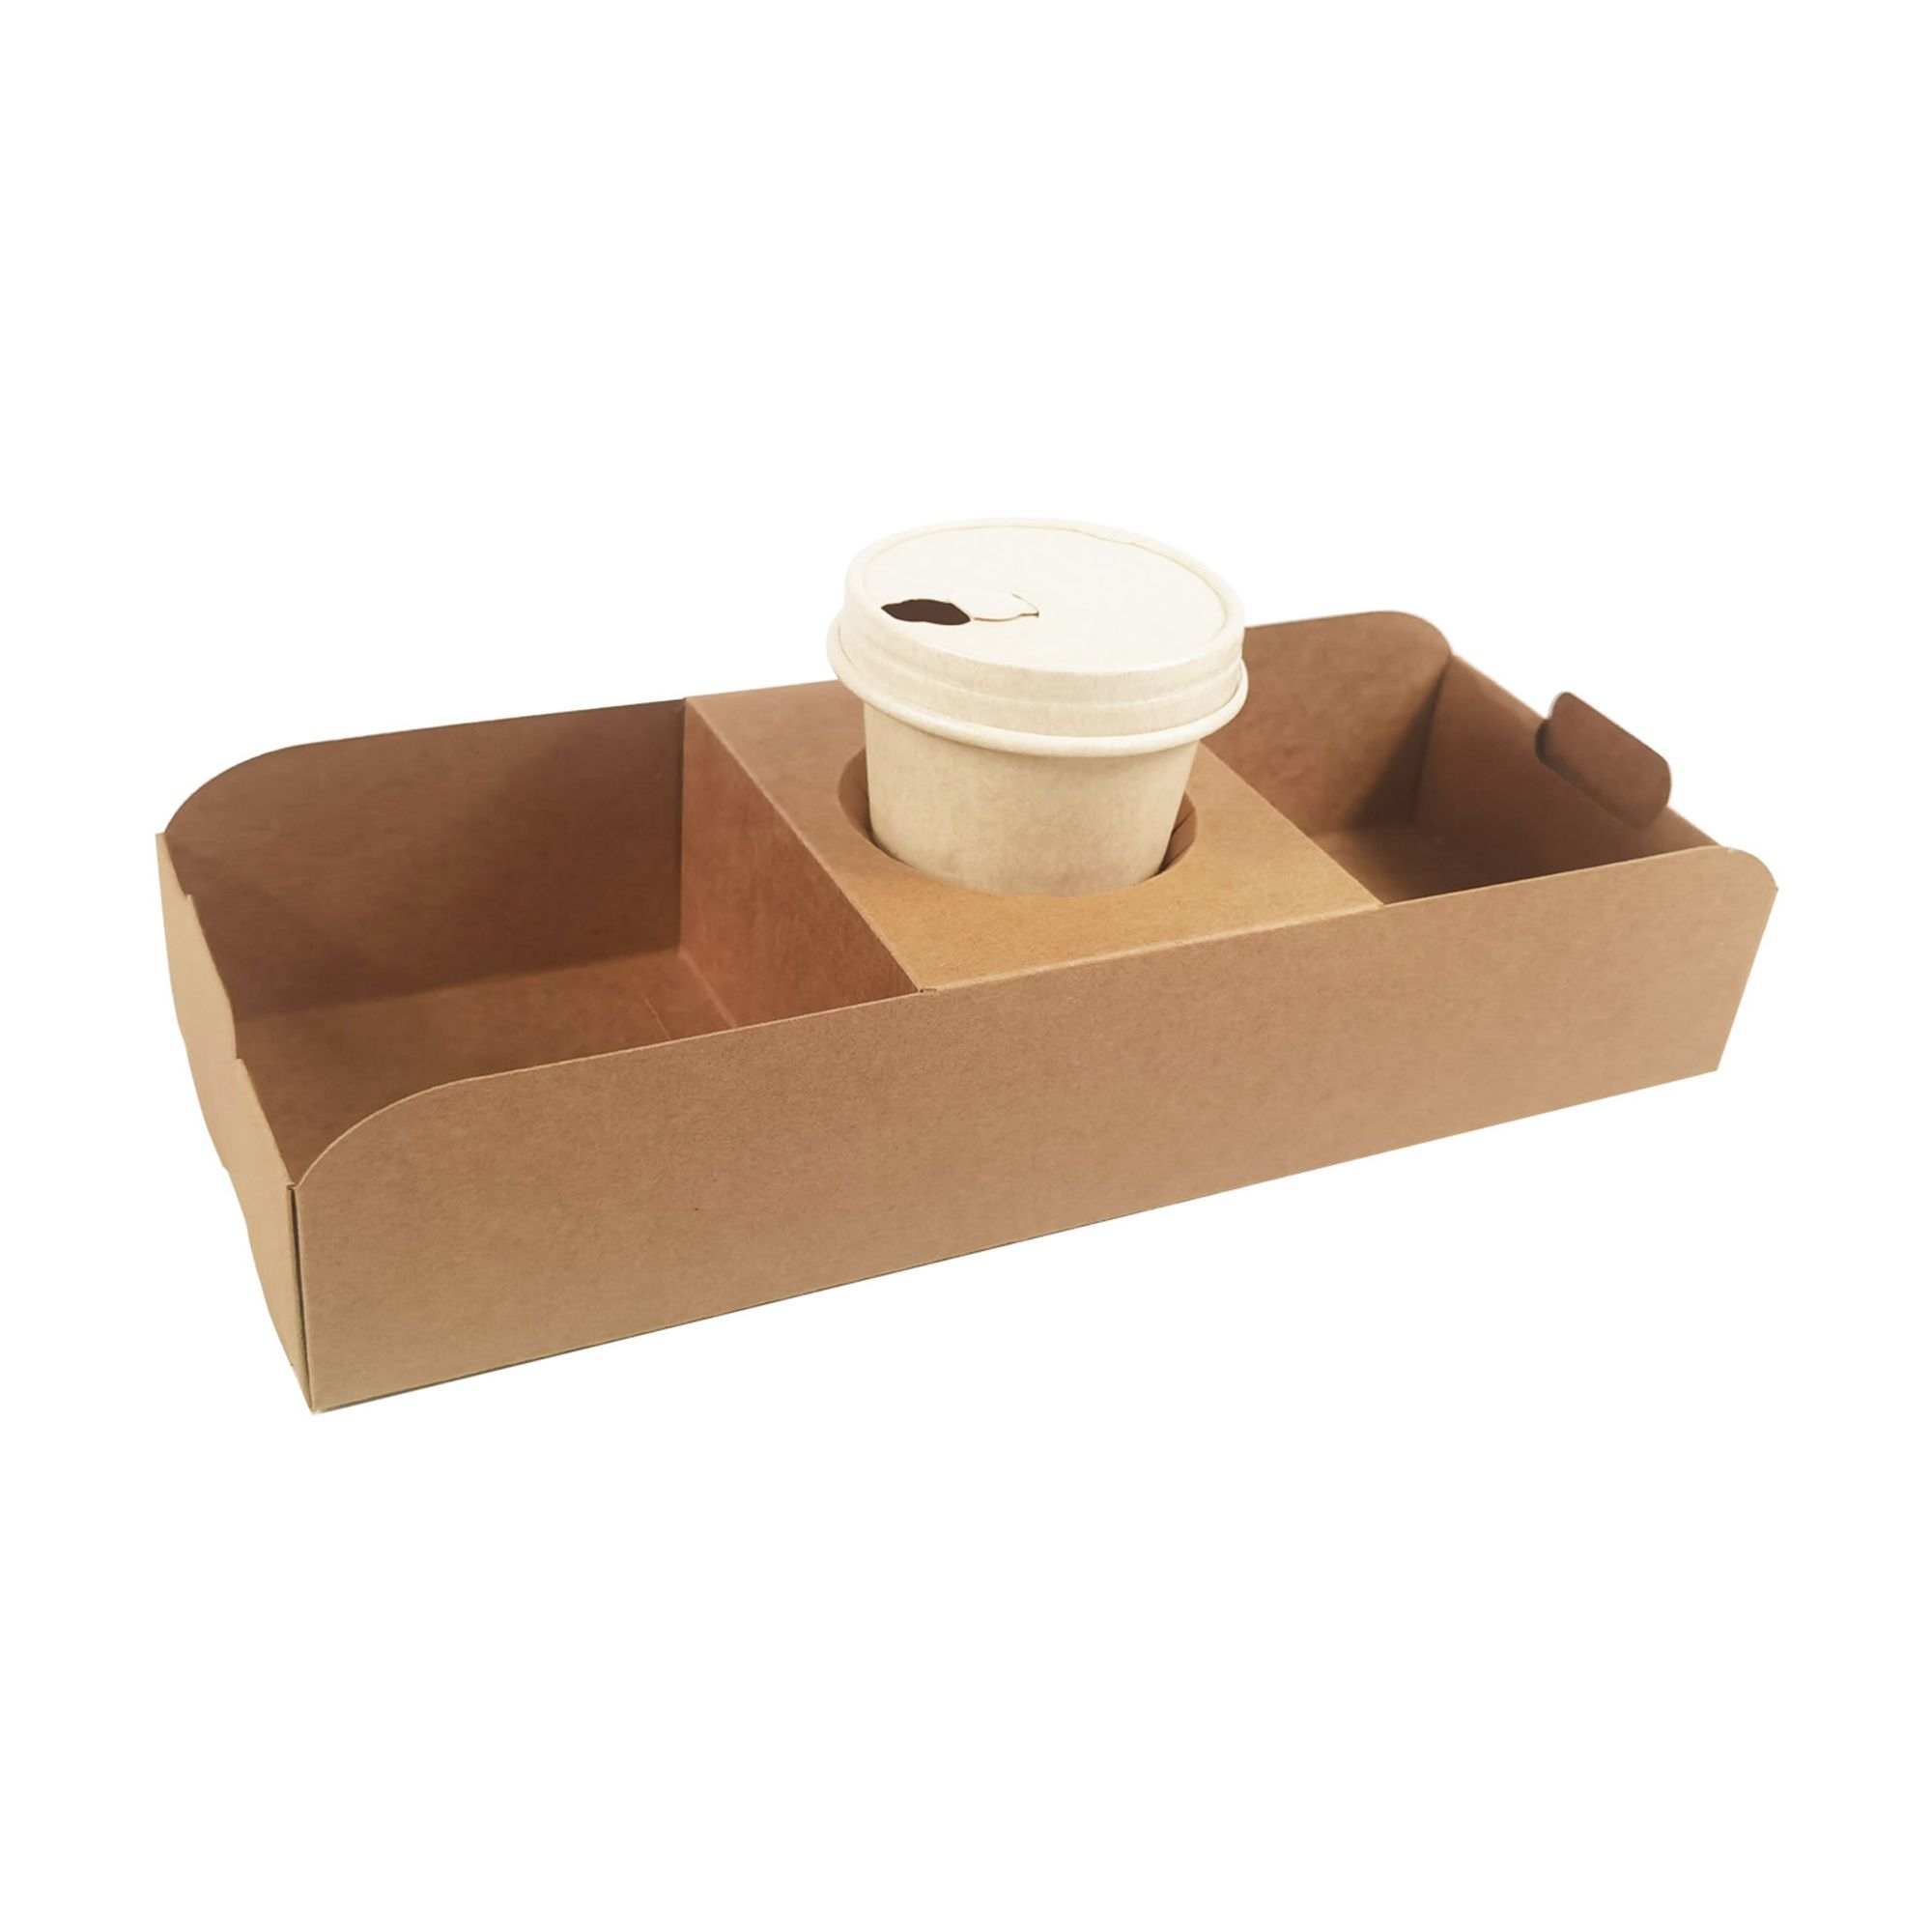 RTO-27 Pop up box with middle drink holder